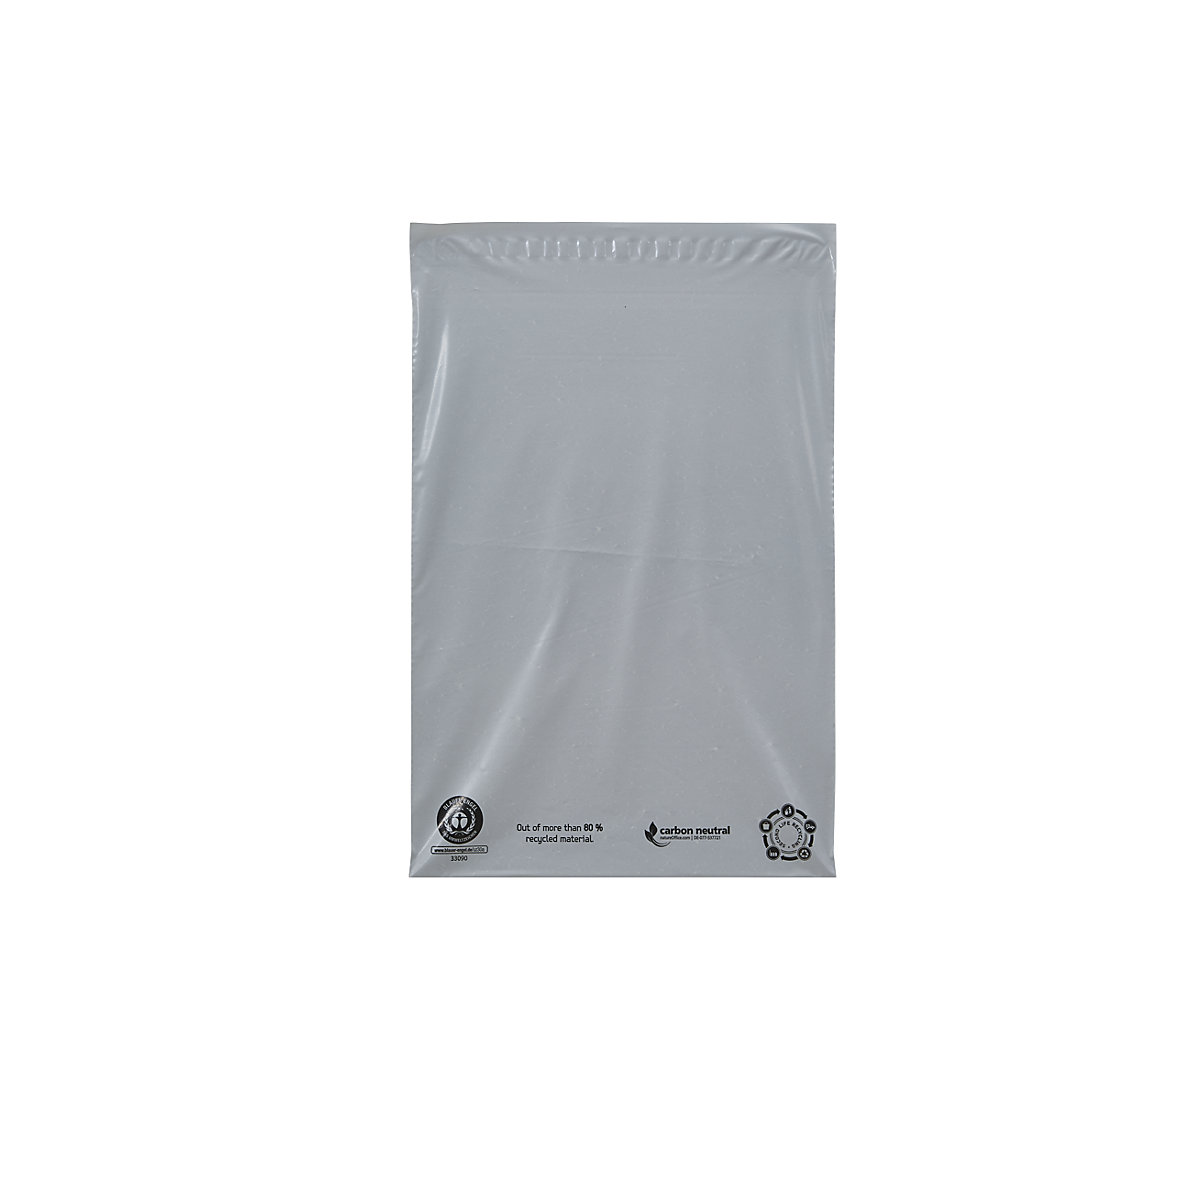 Dispatch bag, non-transparent, film thickness 60 µm, LxW 325 x 245 mm, pack of 1000-3